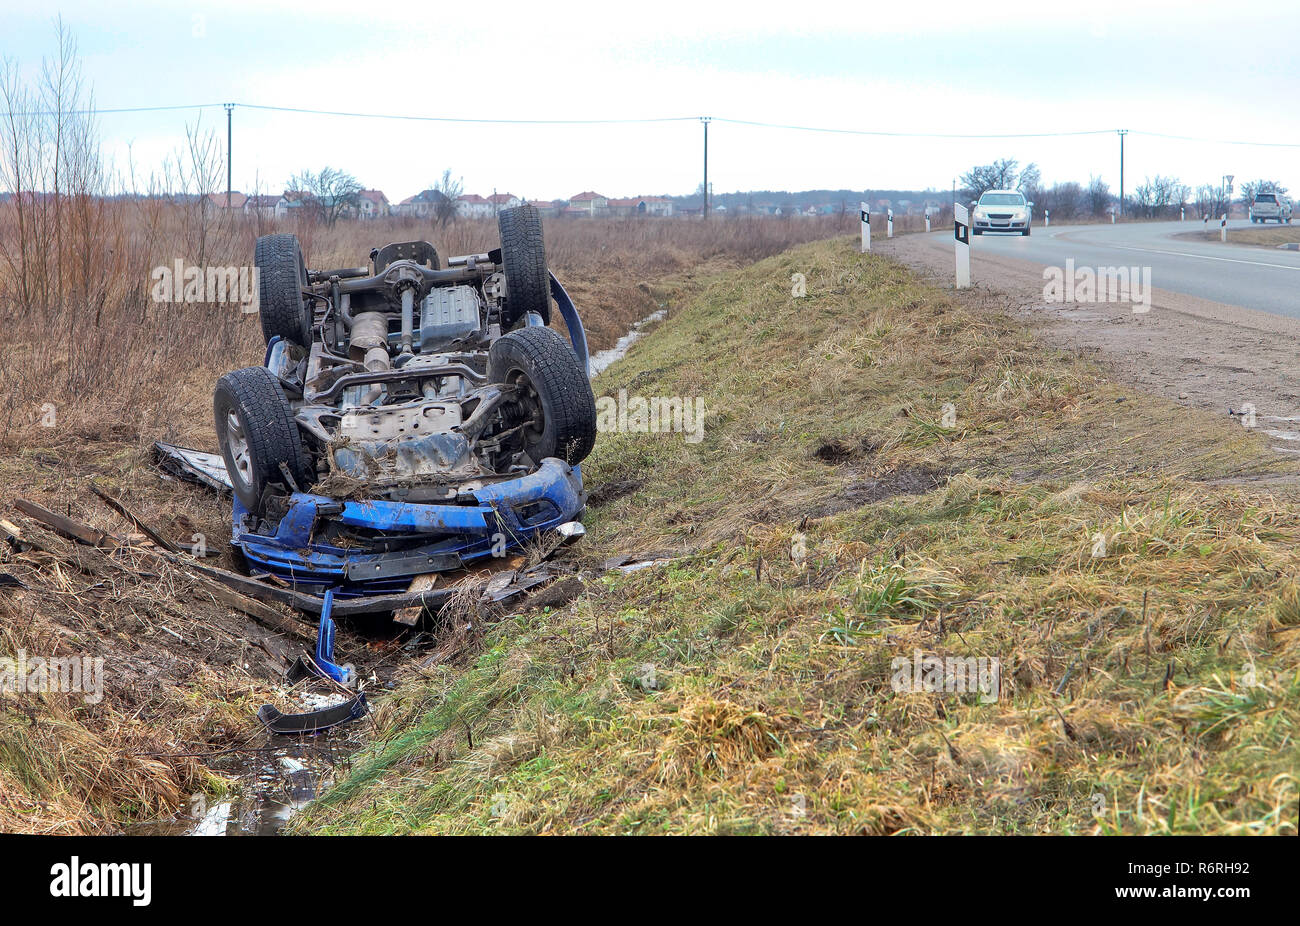 car crash, blue car overturned on the road transport traffic accident Stock Photo